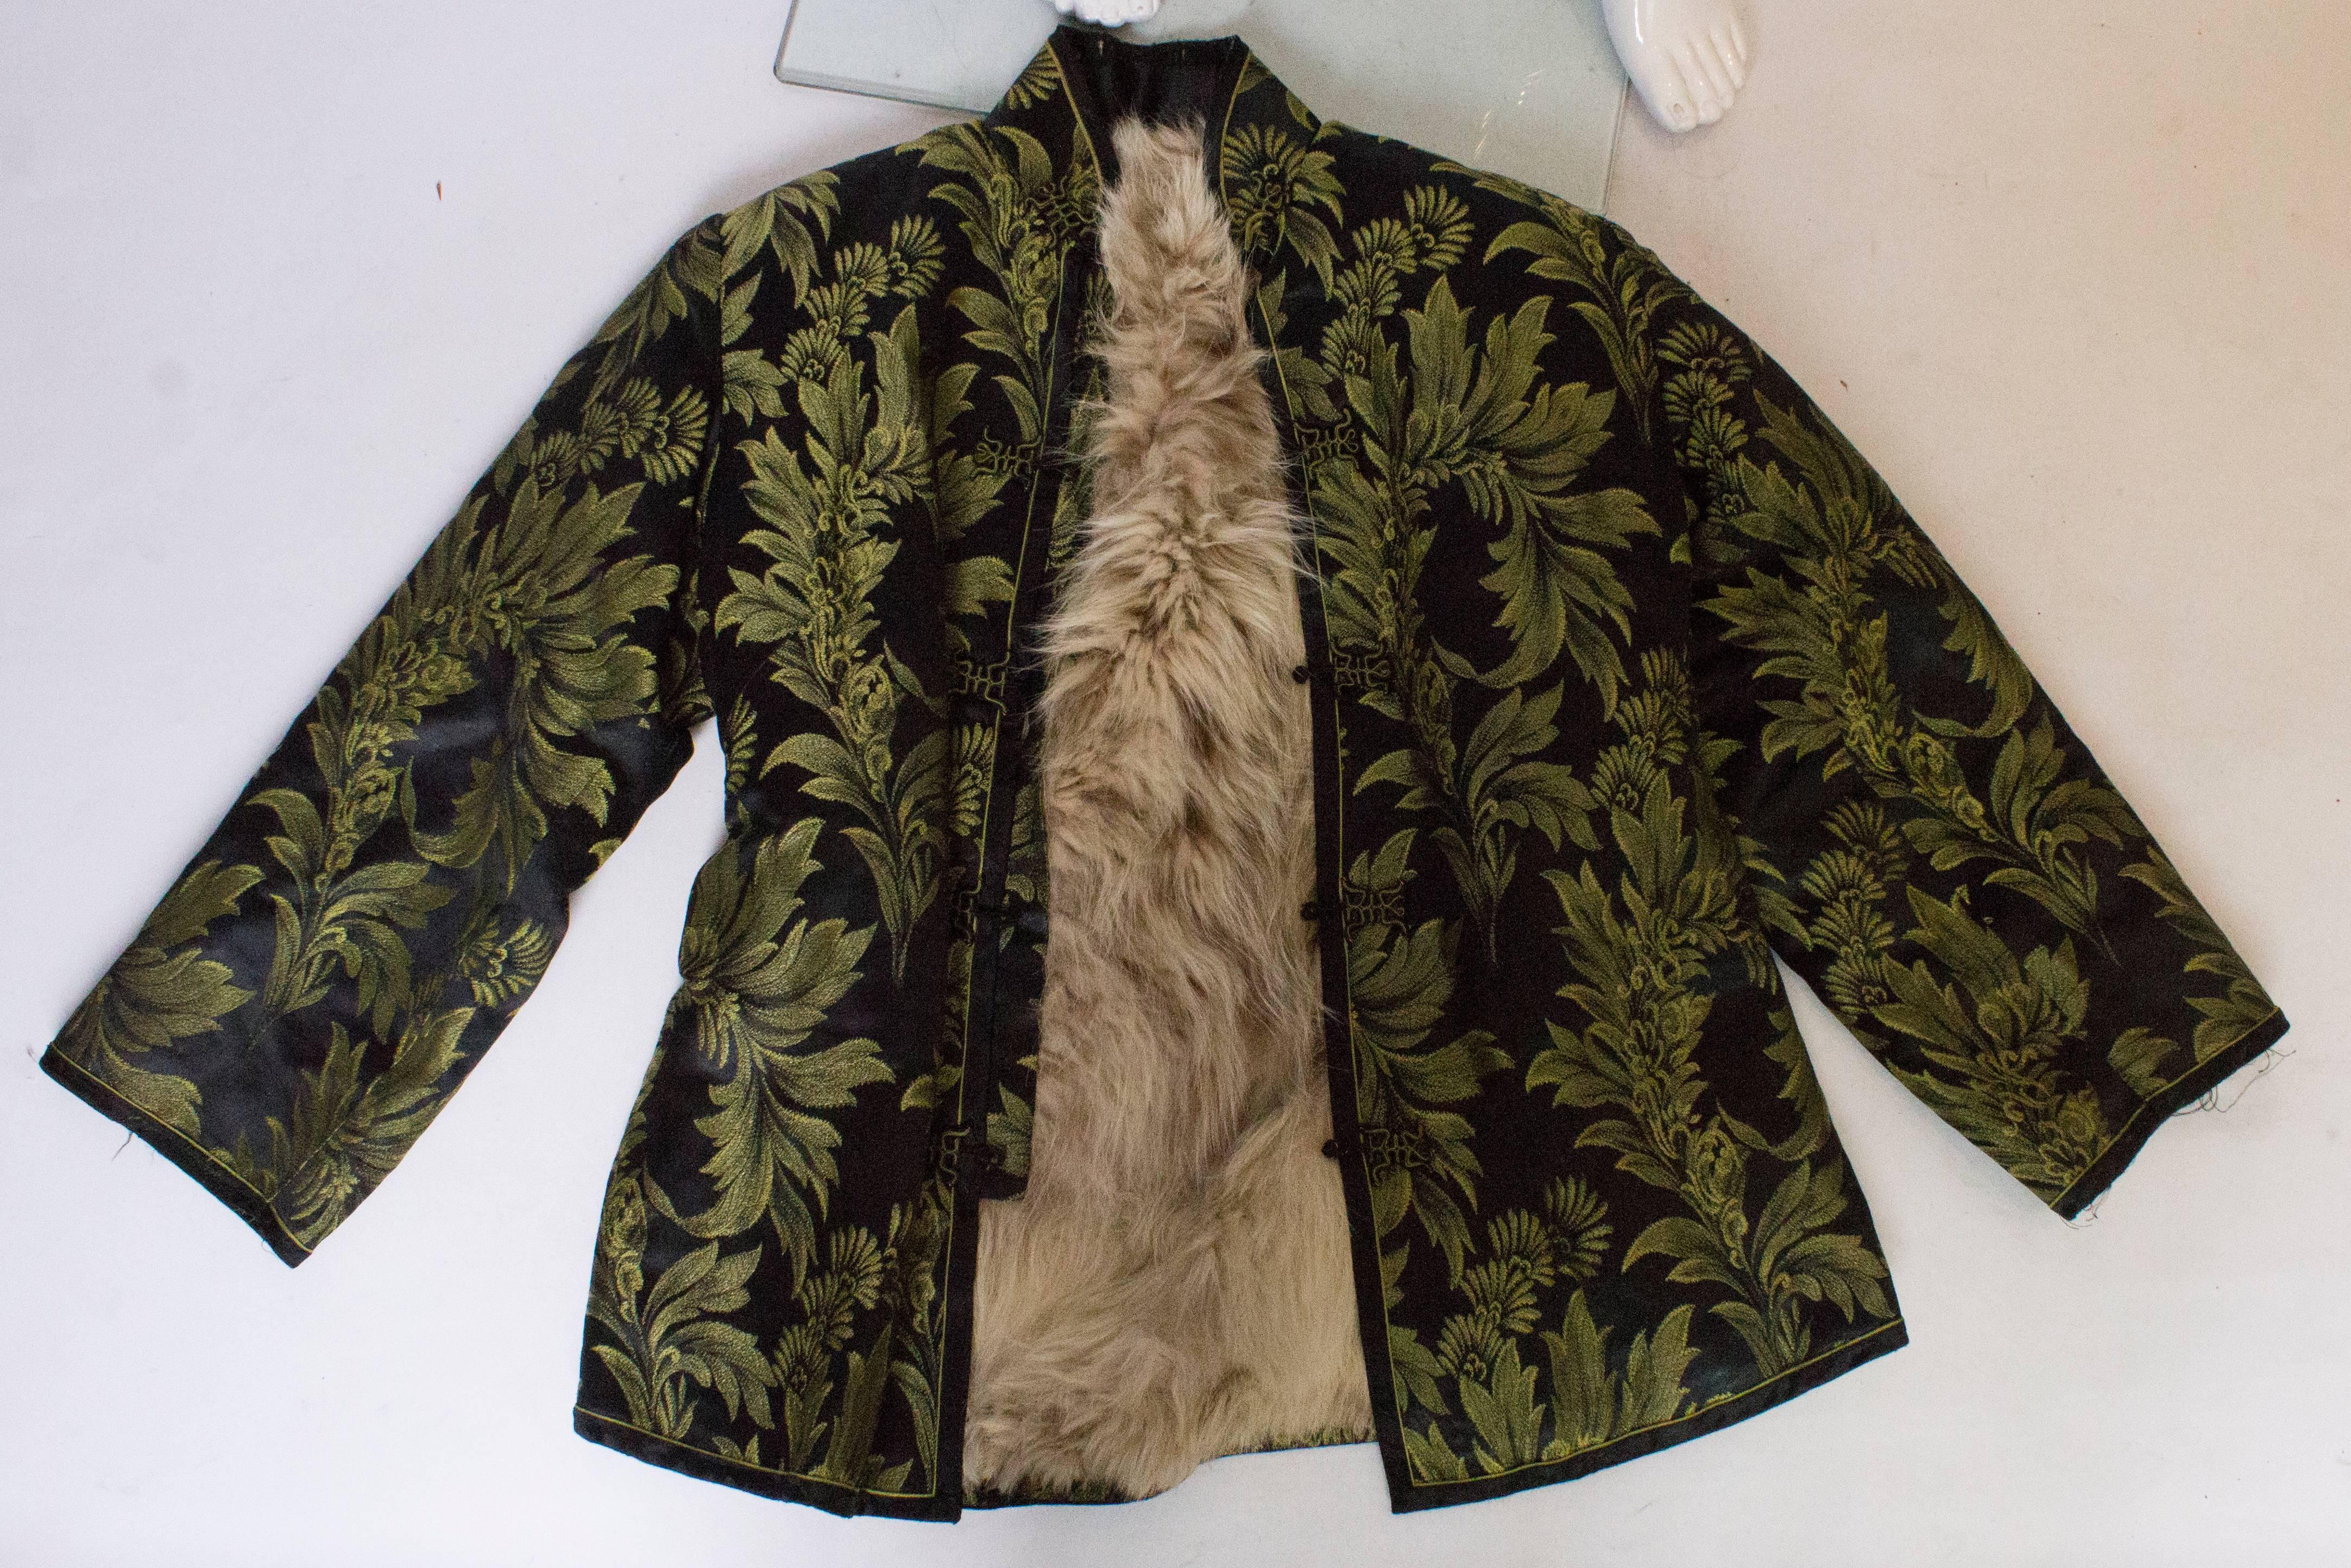 A Vintage 1980s embroidered Chinese jacket with fur lining. 1